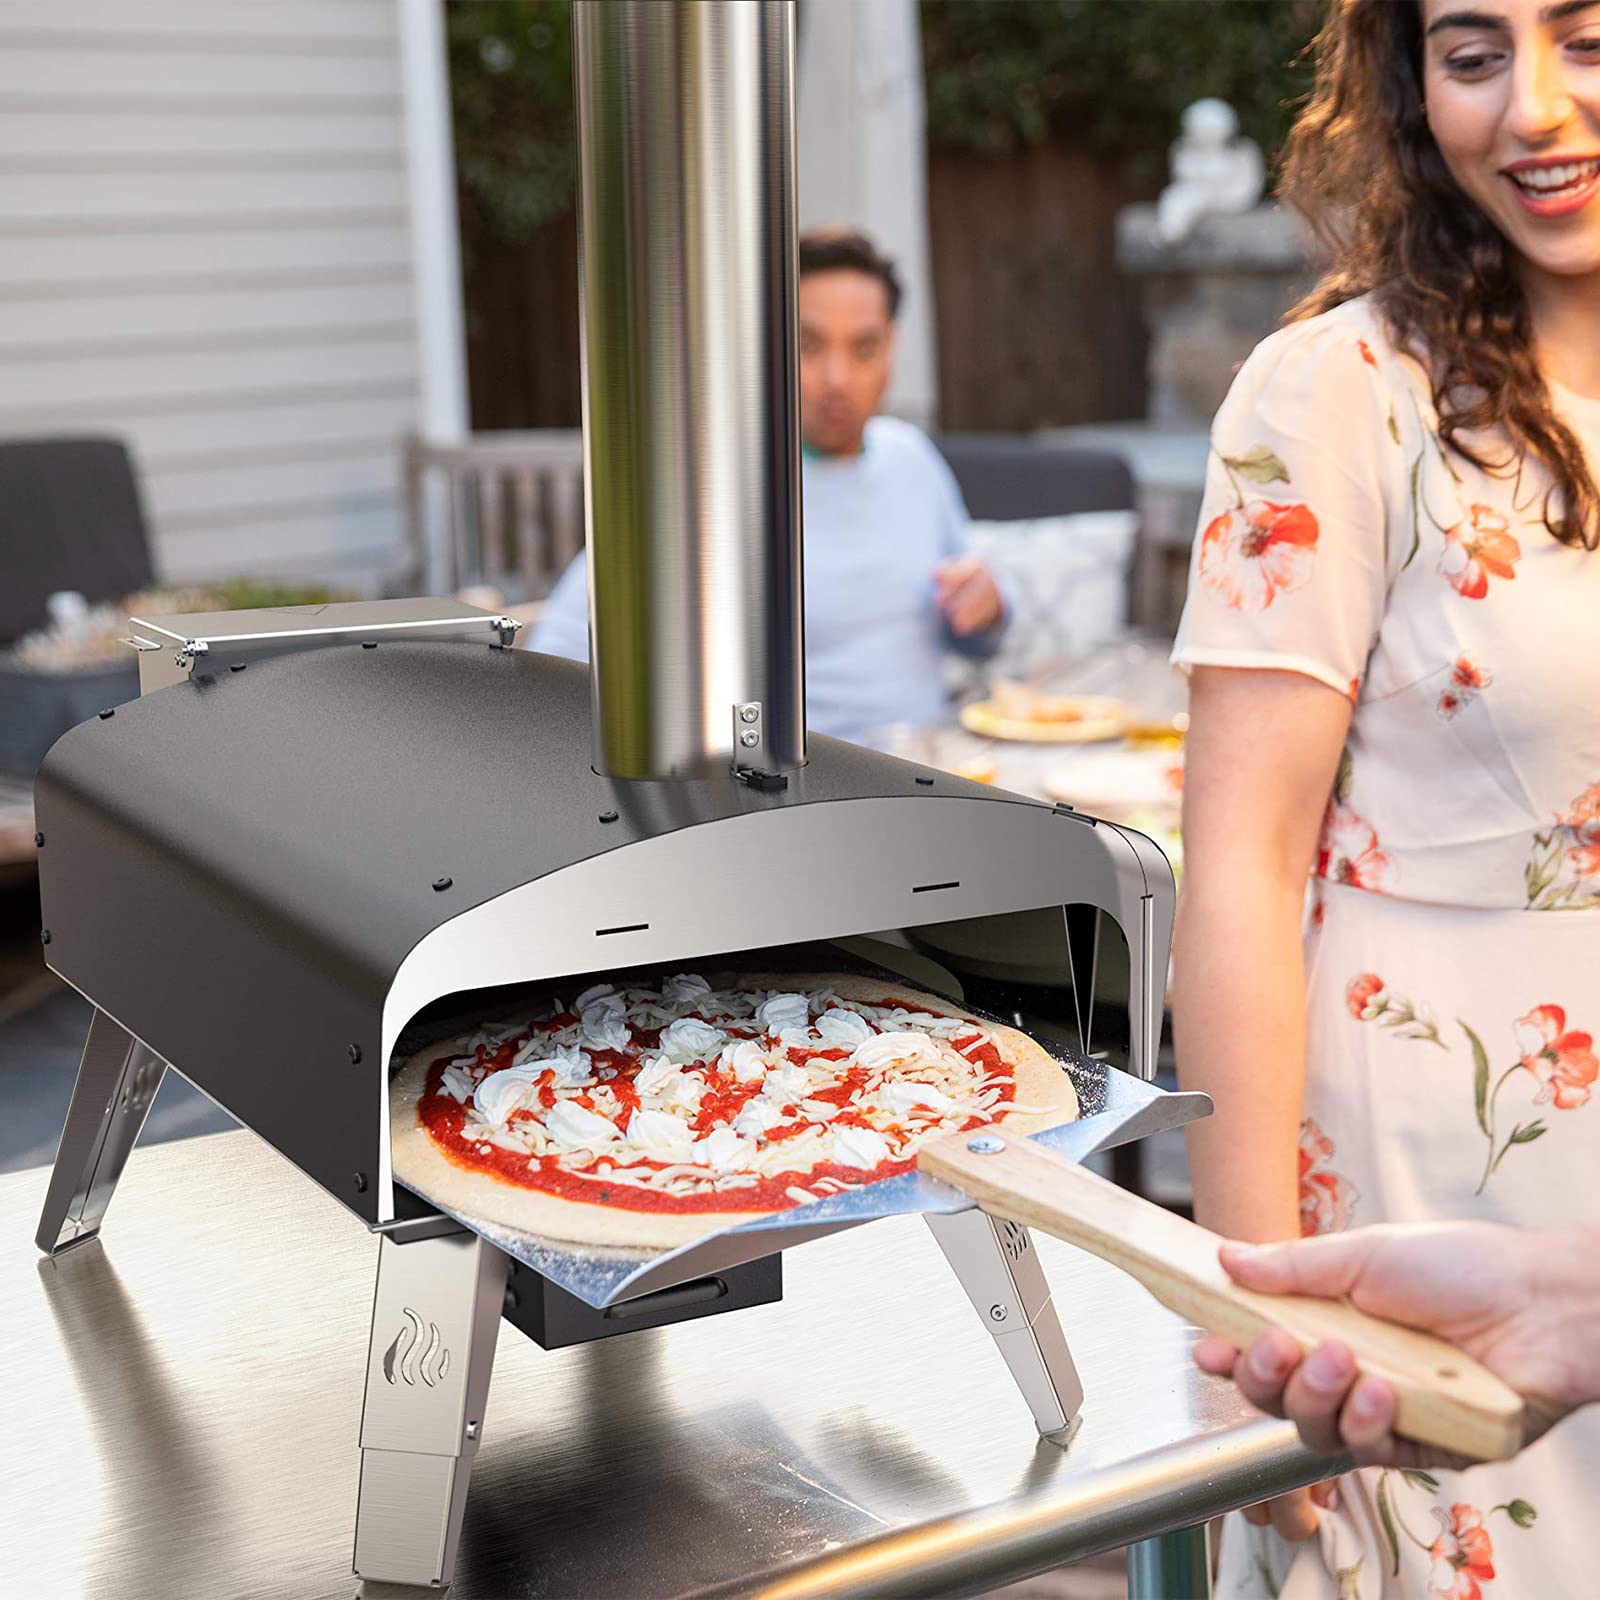 Mimiuo Black Portable Wood Pellet Pizza Oven with 13